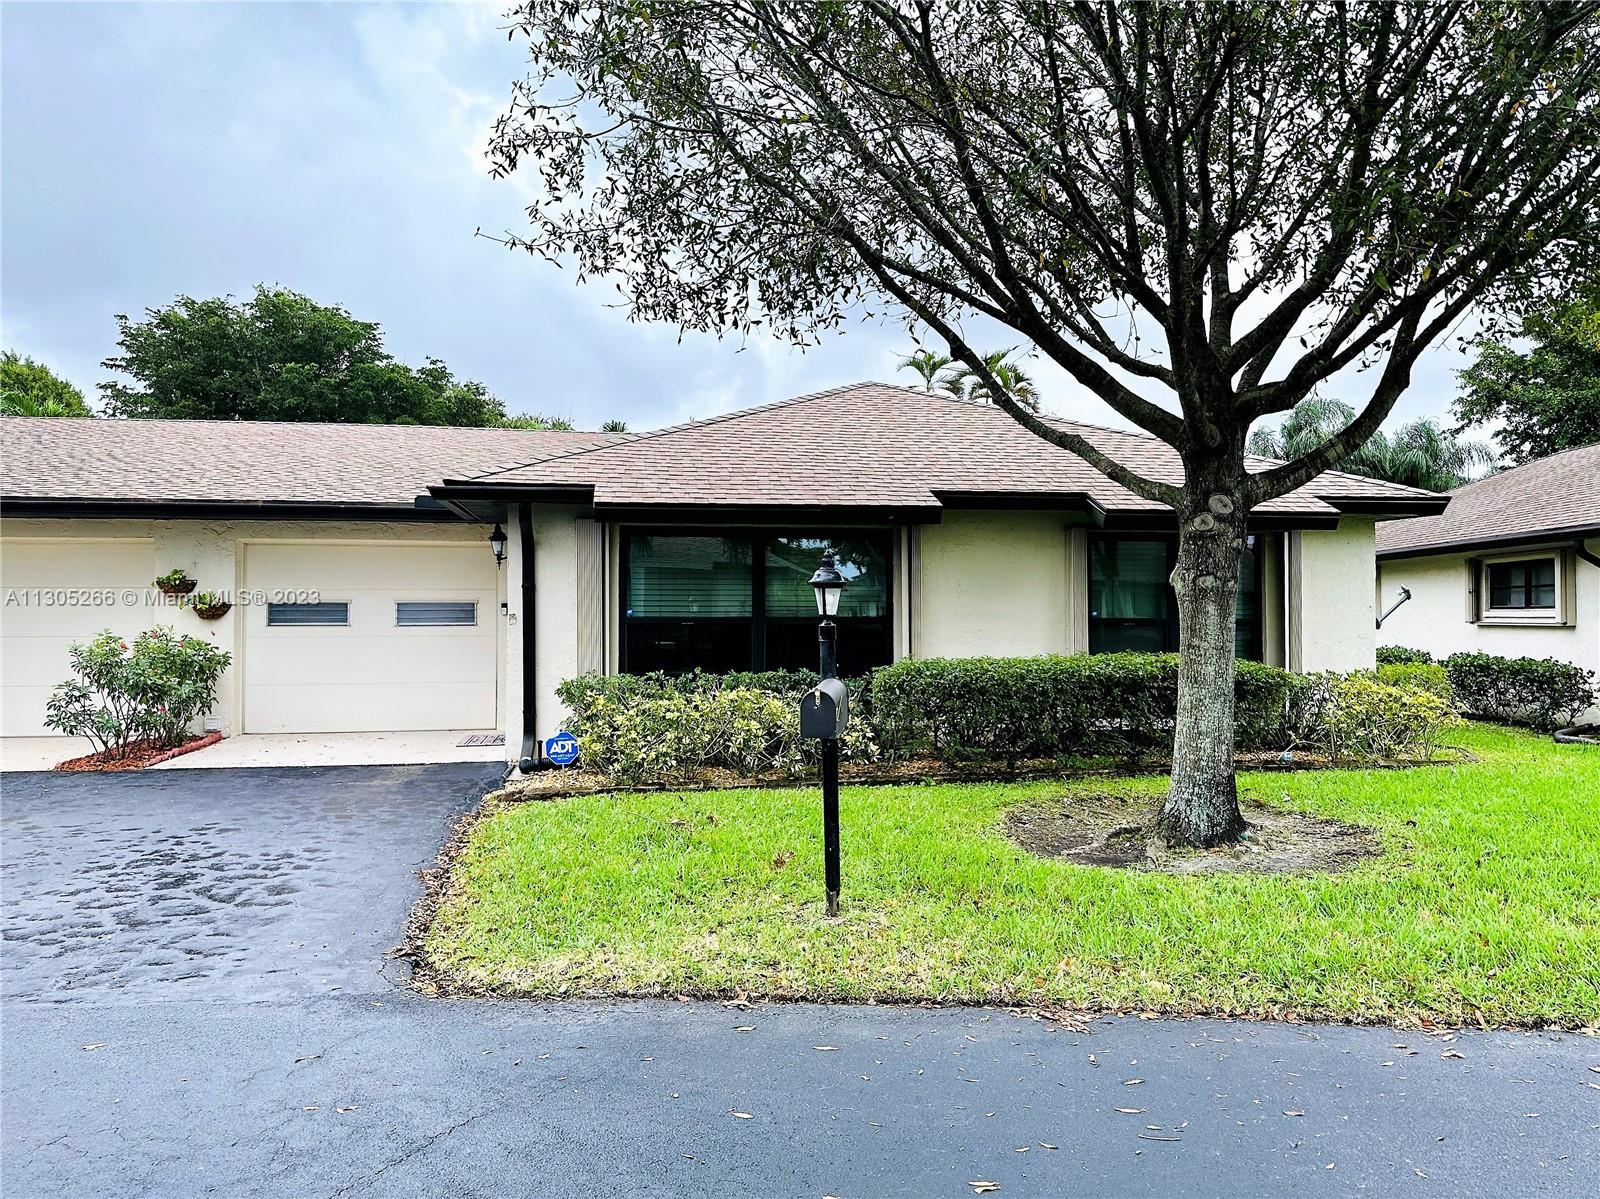 Enjoy living the Florida lifestyle from this 2/2 villa at beautiful Greentree. Unit features include